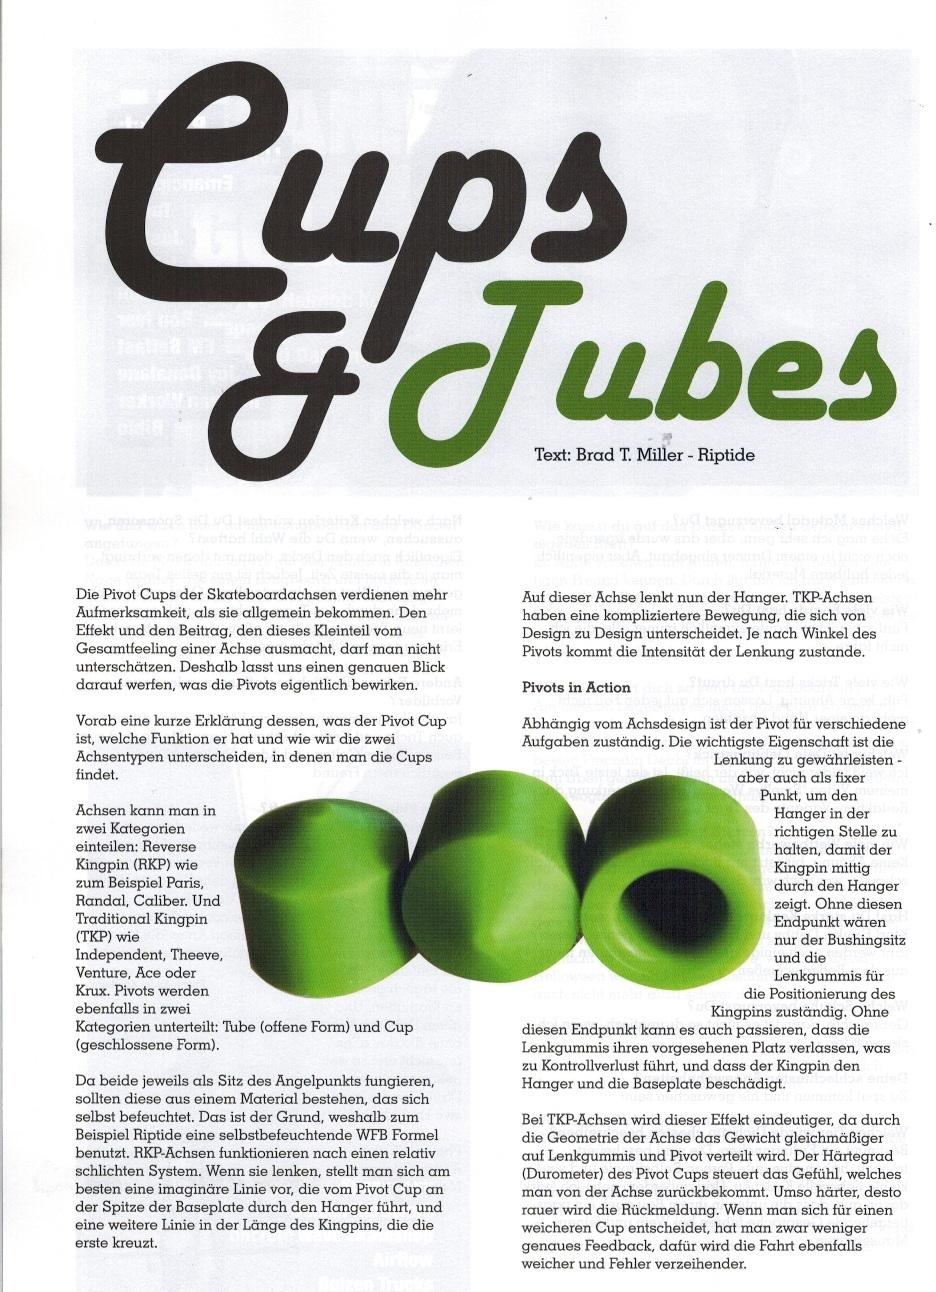 40in-magazine-article-by-brad-miller-riptide-pivot-cups-tubes.jpg